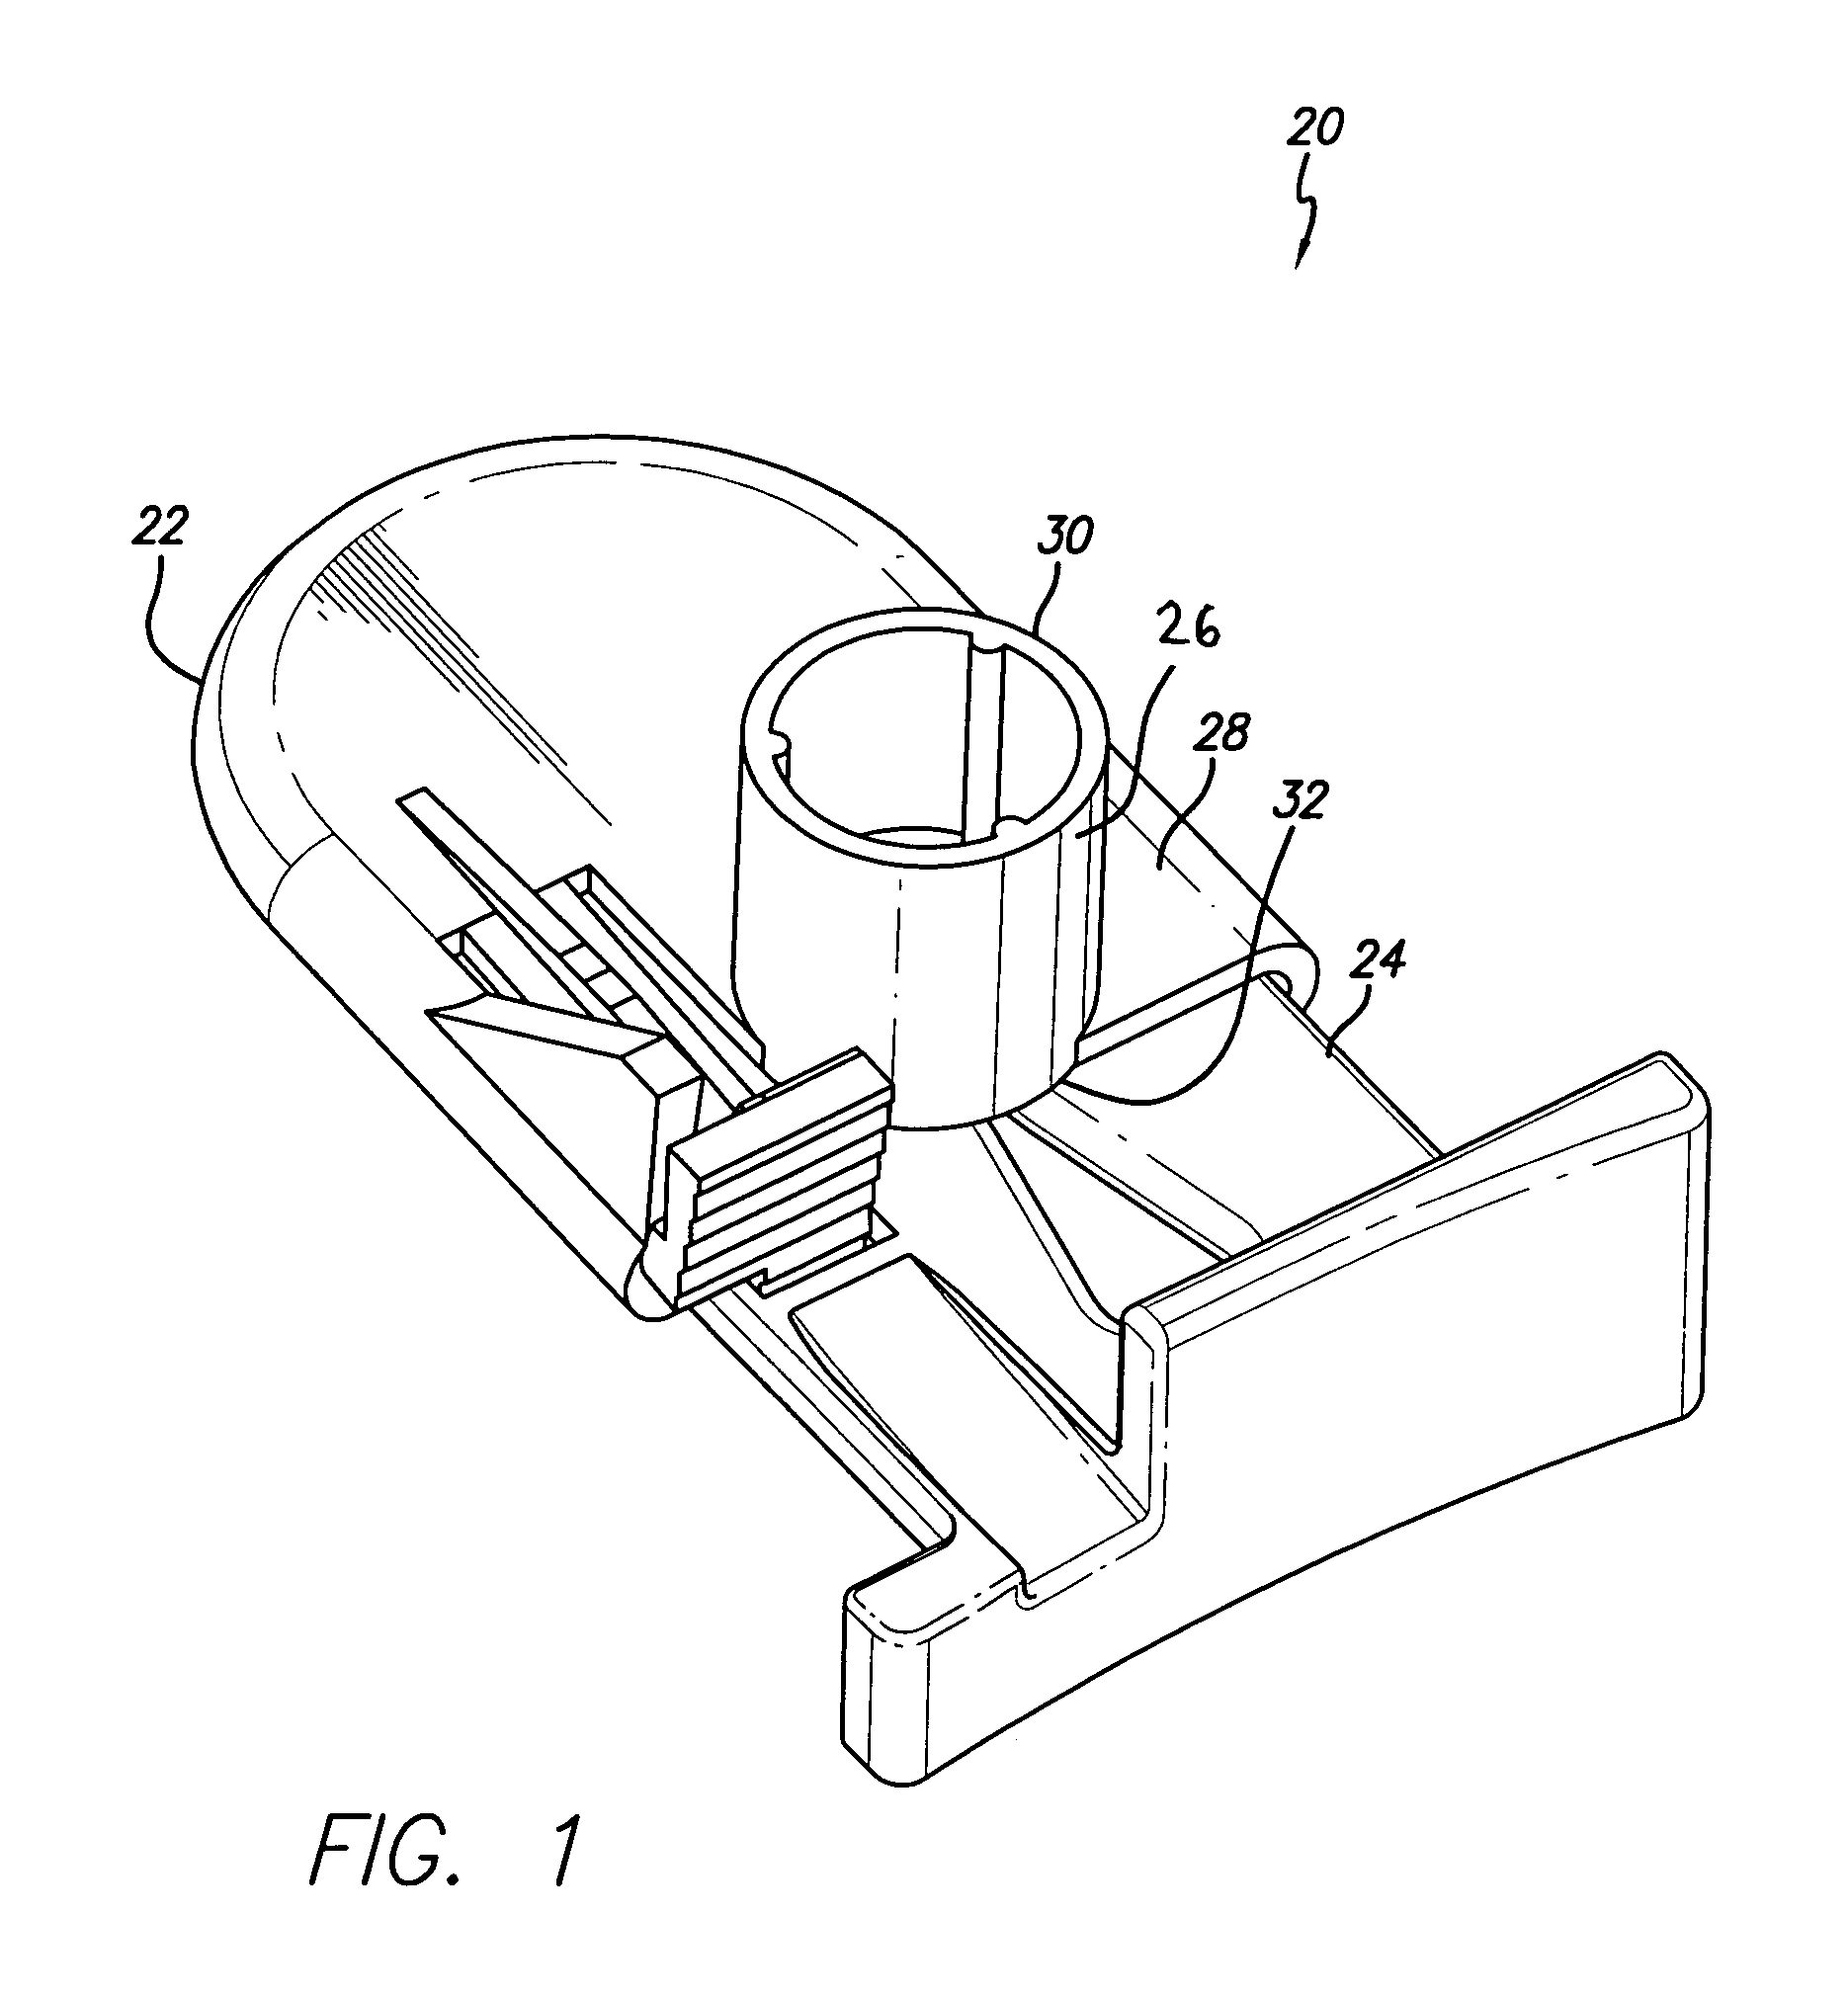 Automatic clamp apparatus for IV infusion sets used in pump devices